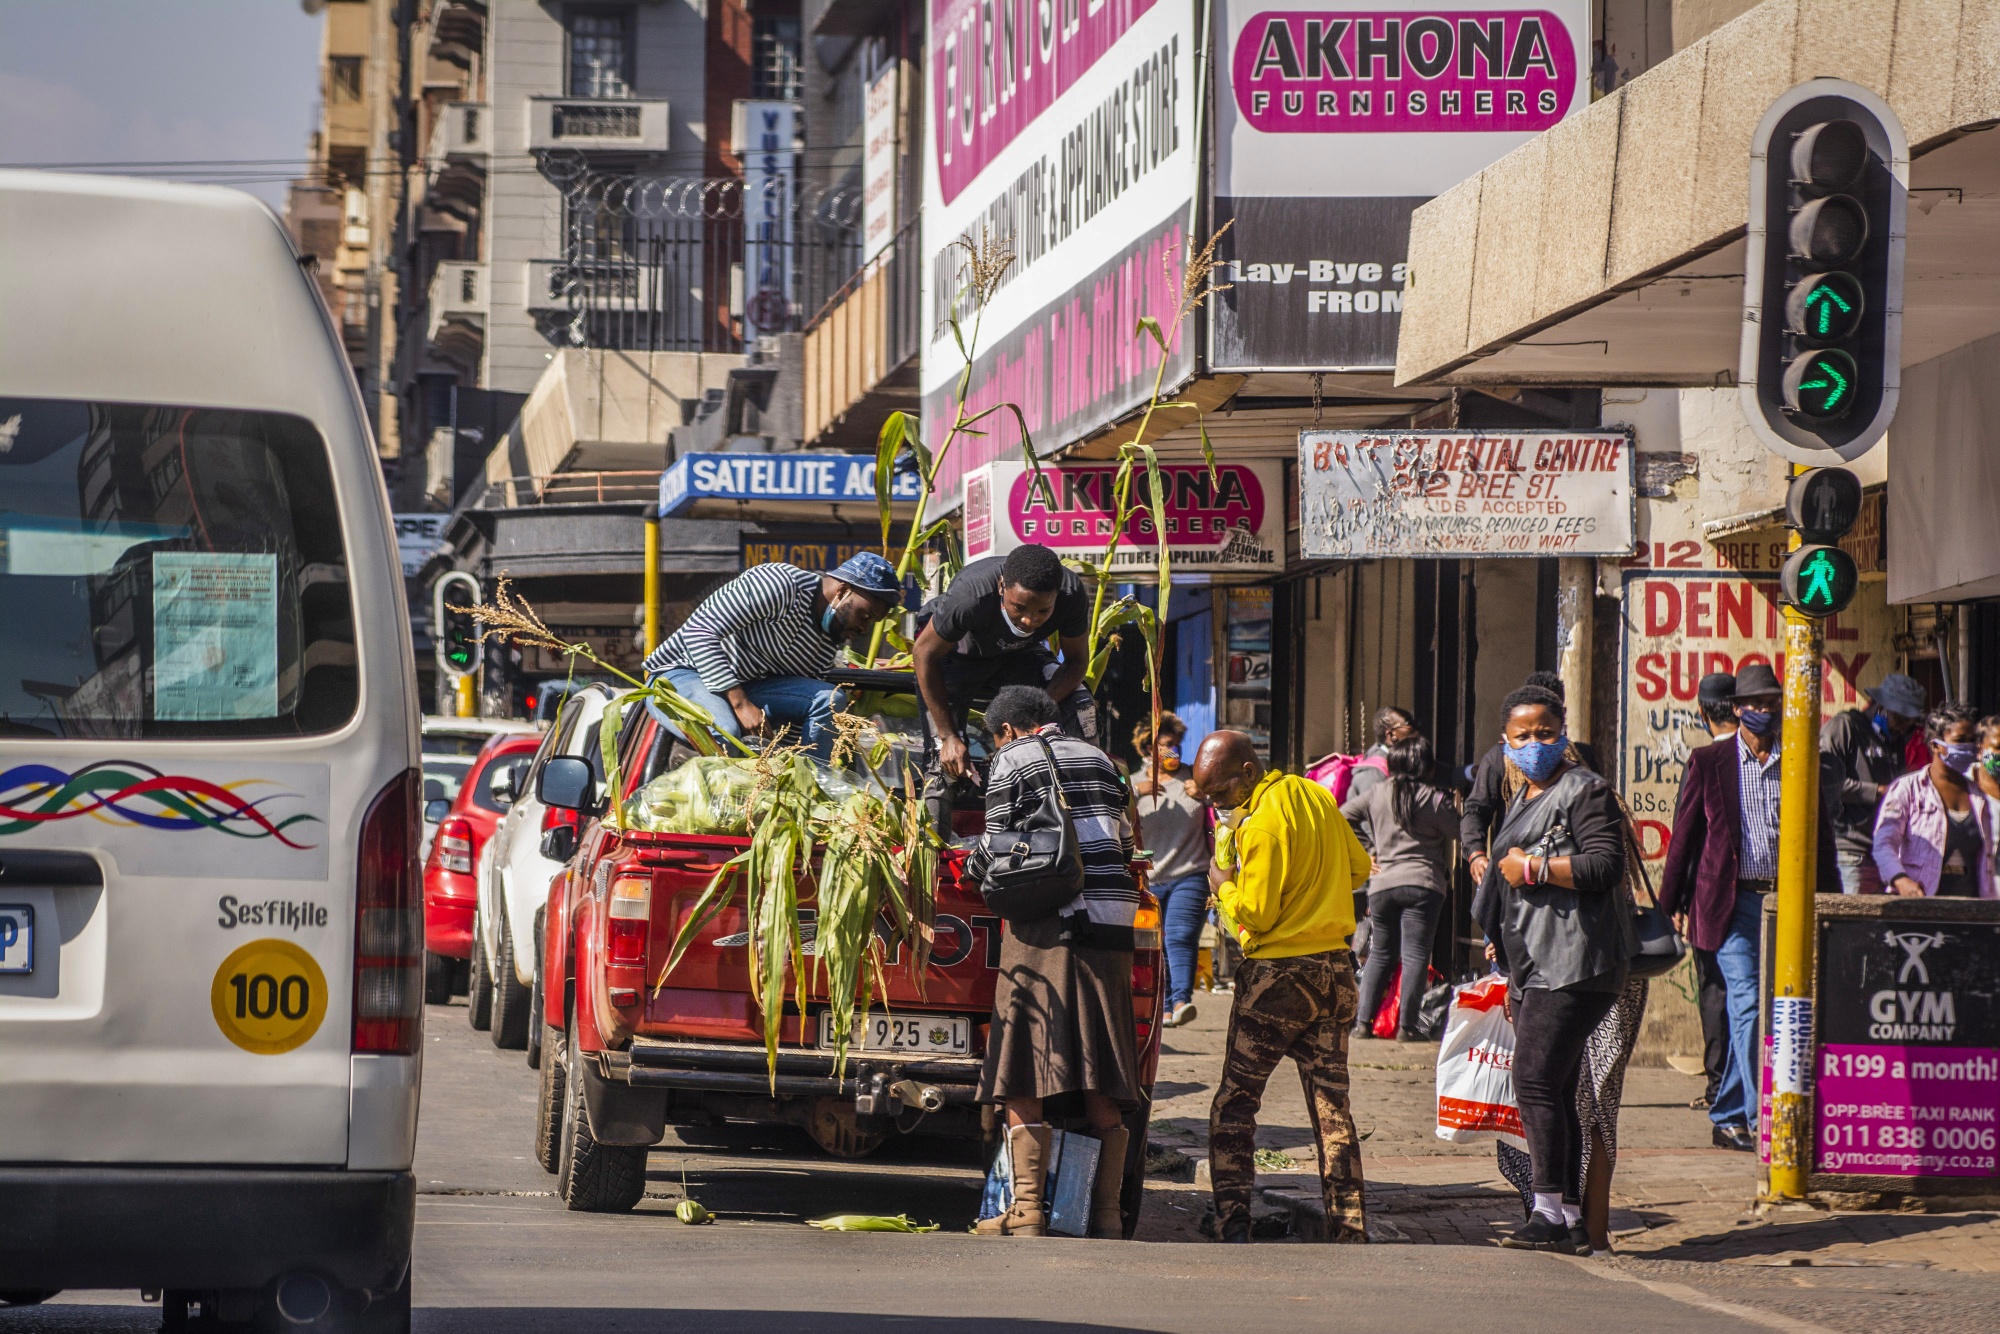 People gather to buy corn from a street vendor in Johannesburg.